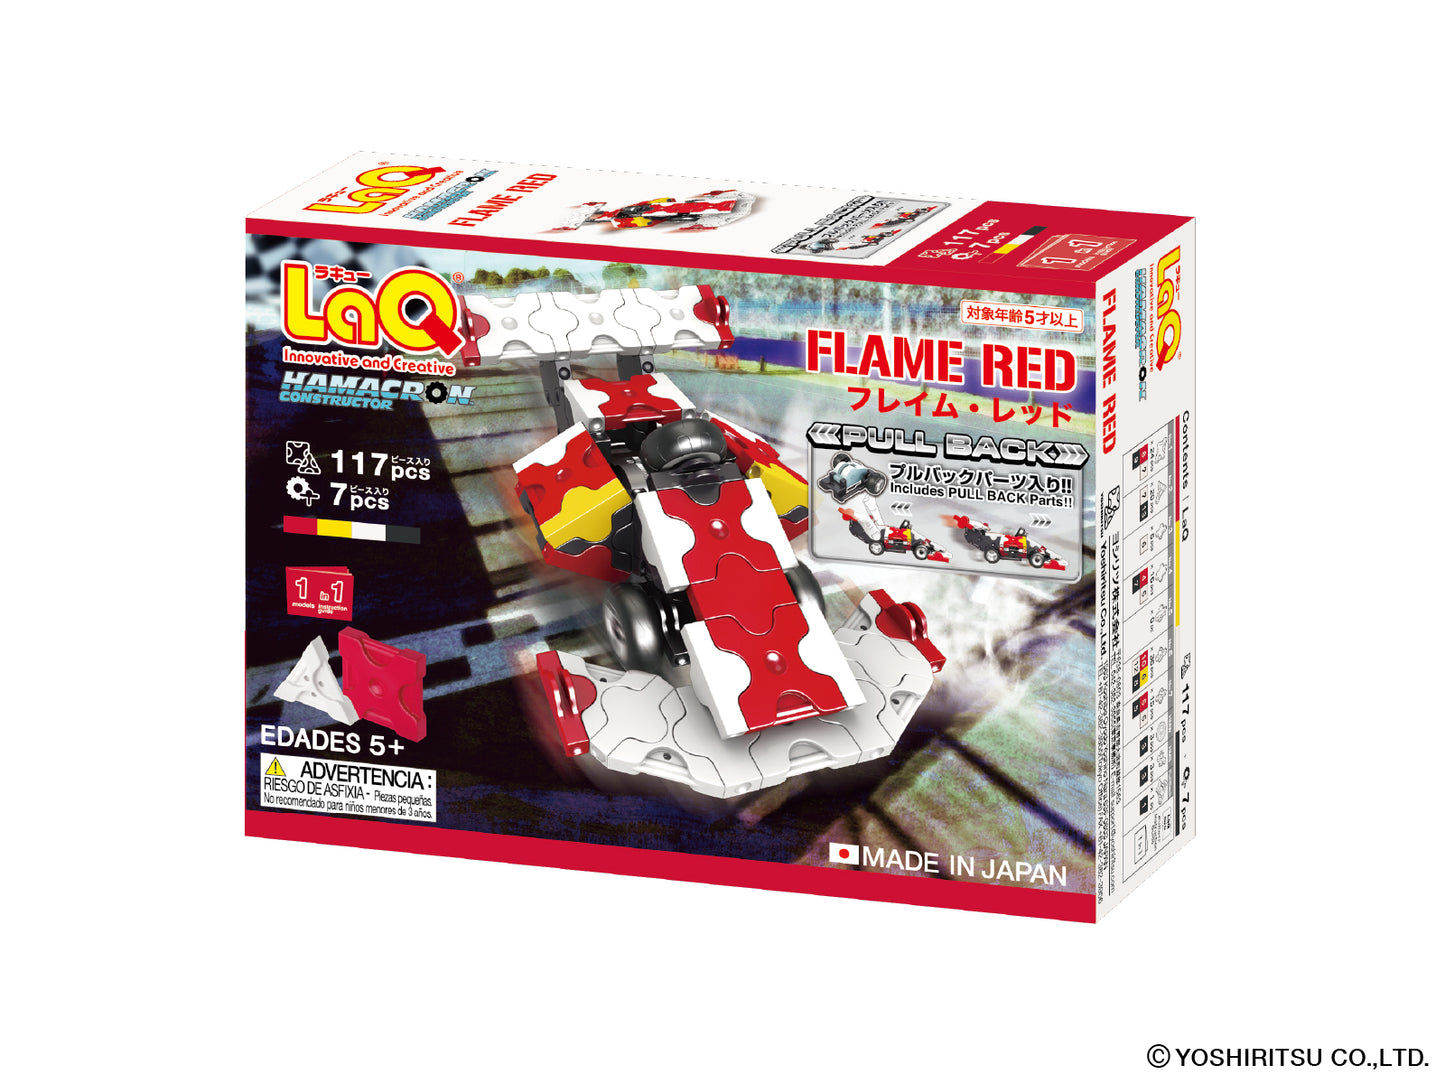 LaQ Hamacron Constructor Fame Red Pull-back